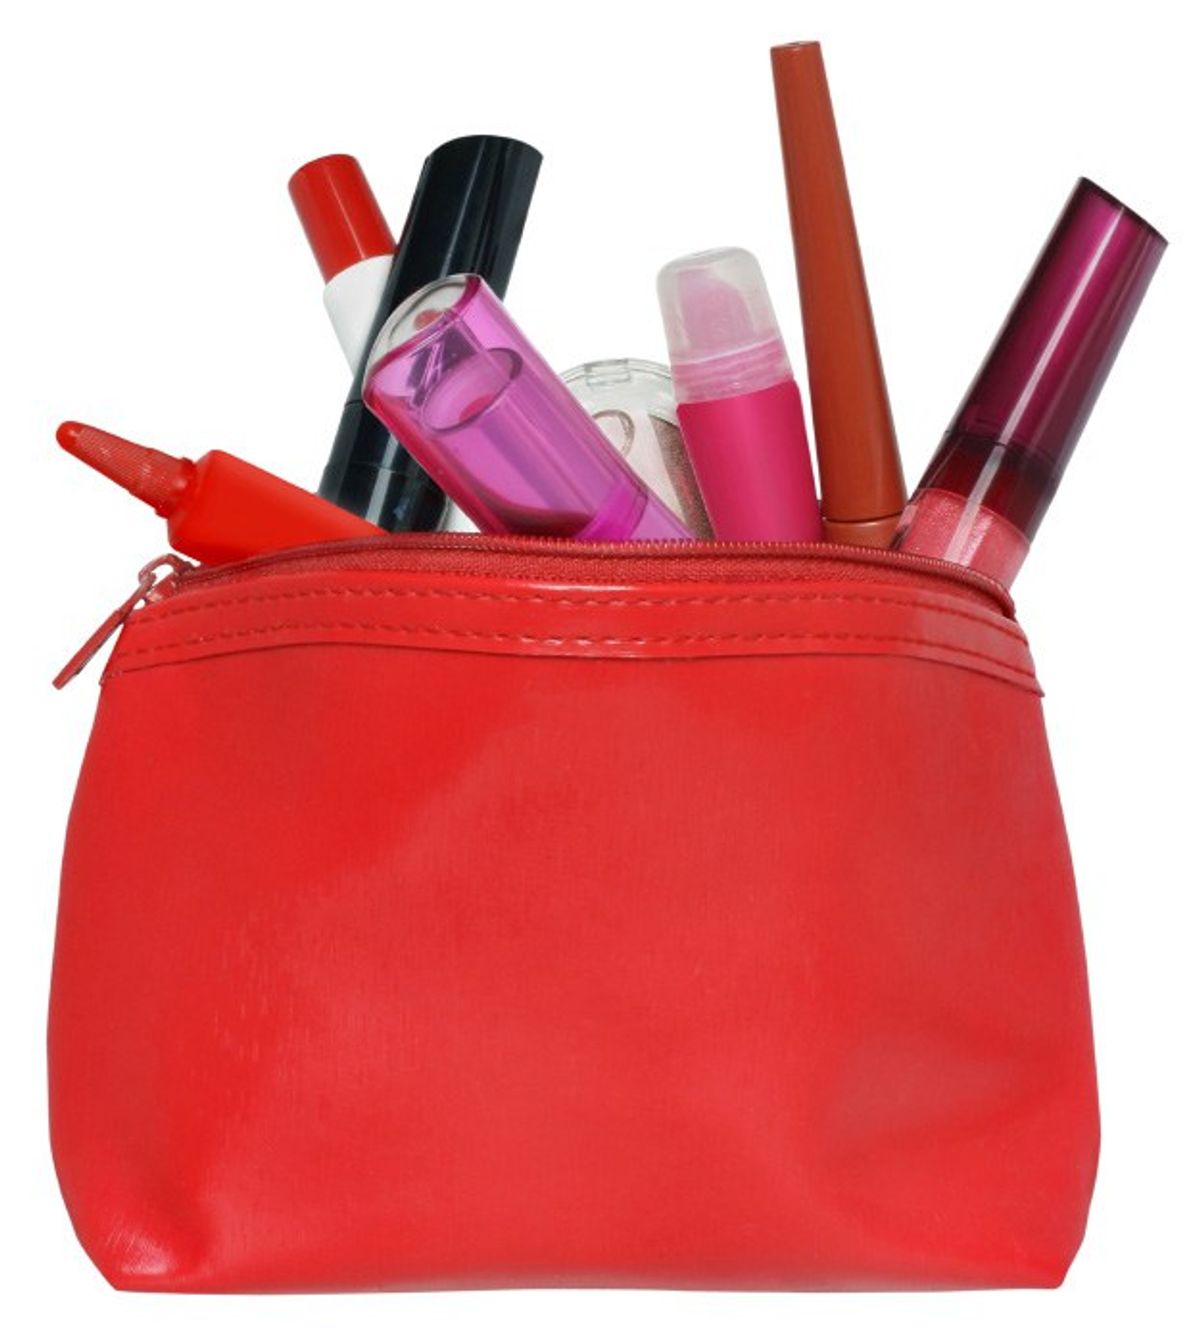 Top 4 Beauty Essentials For Your Book Bag